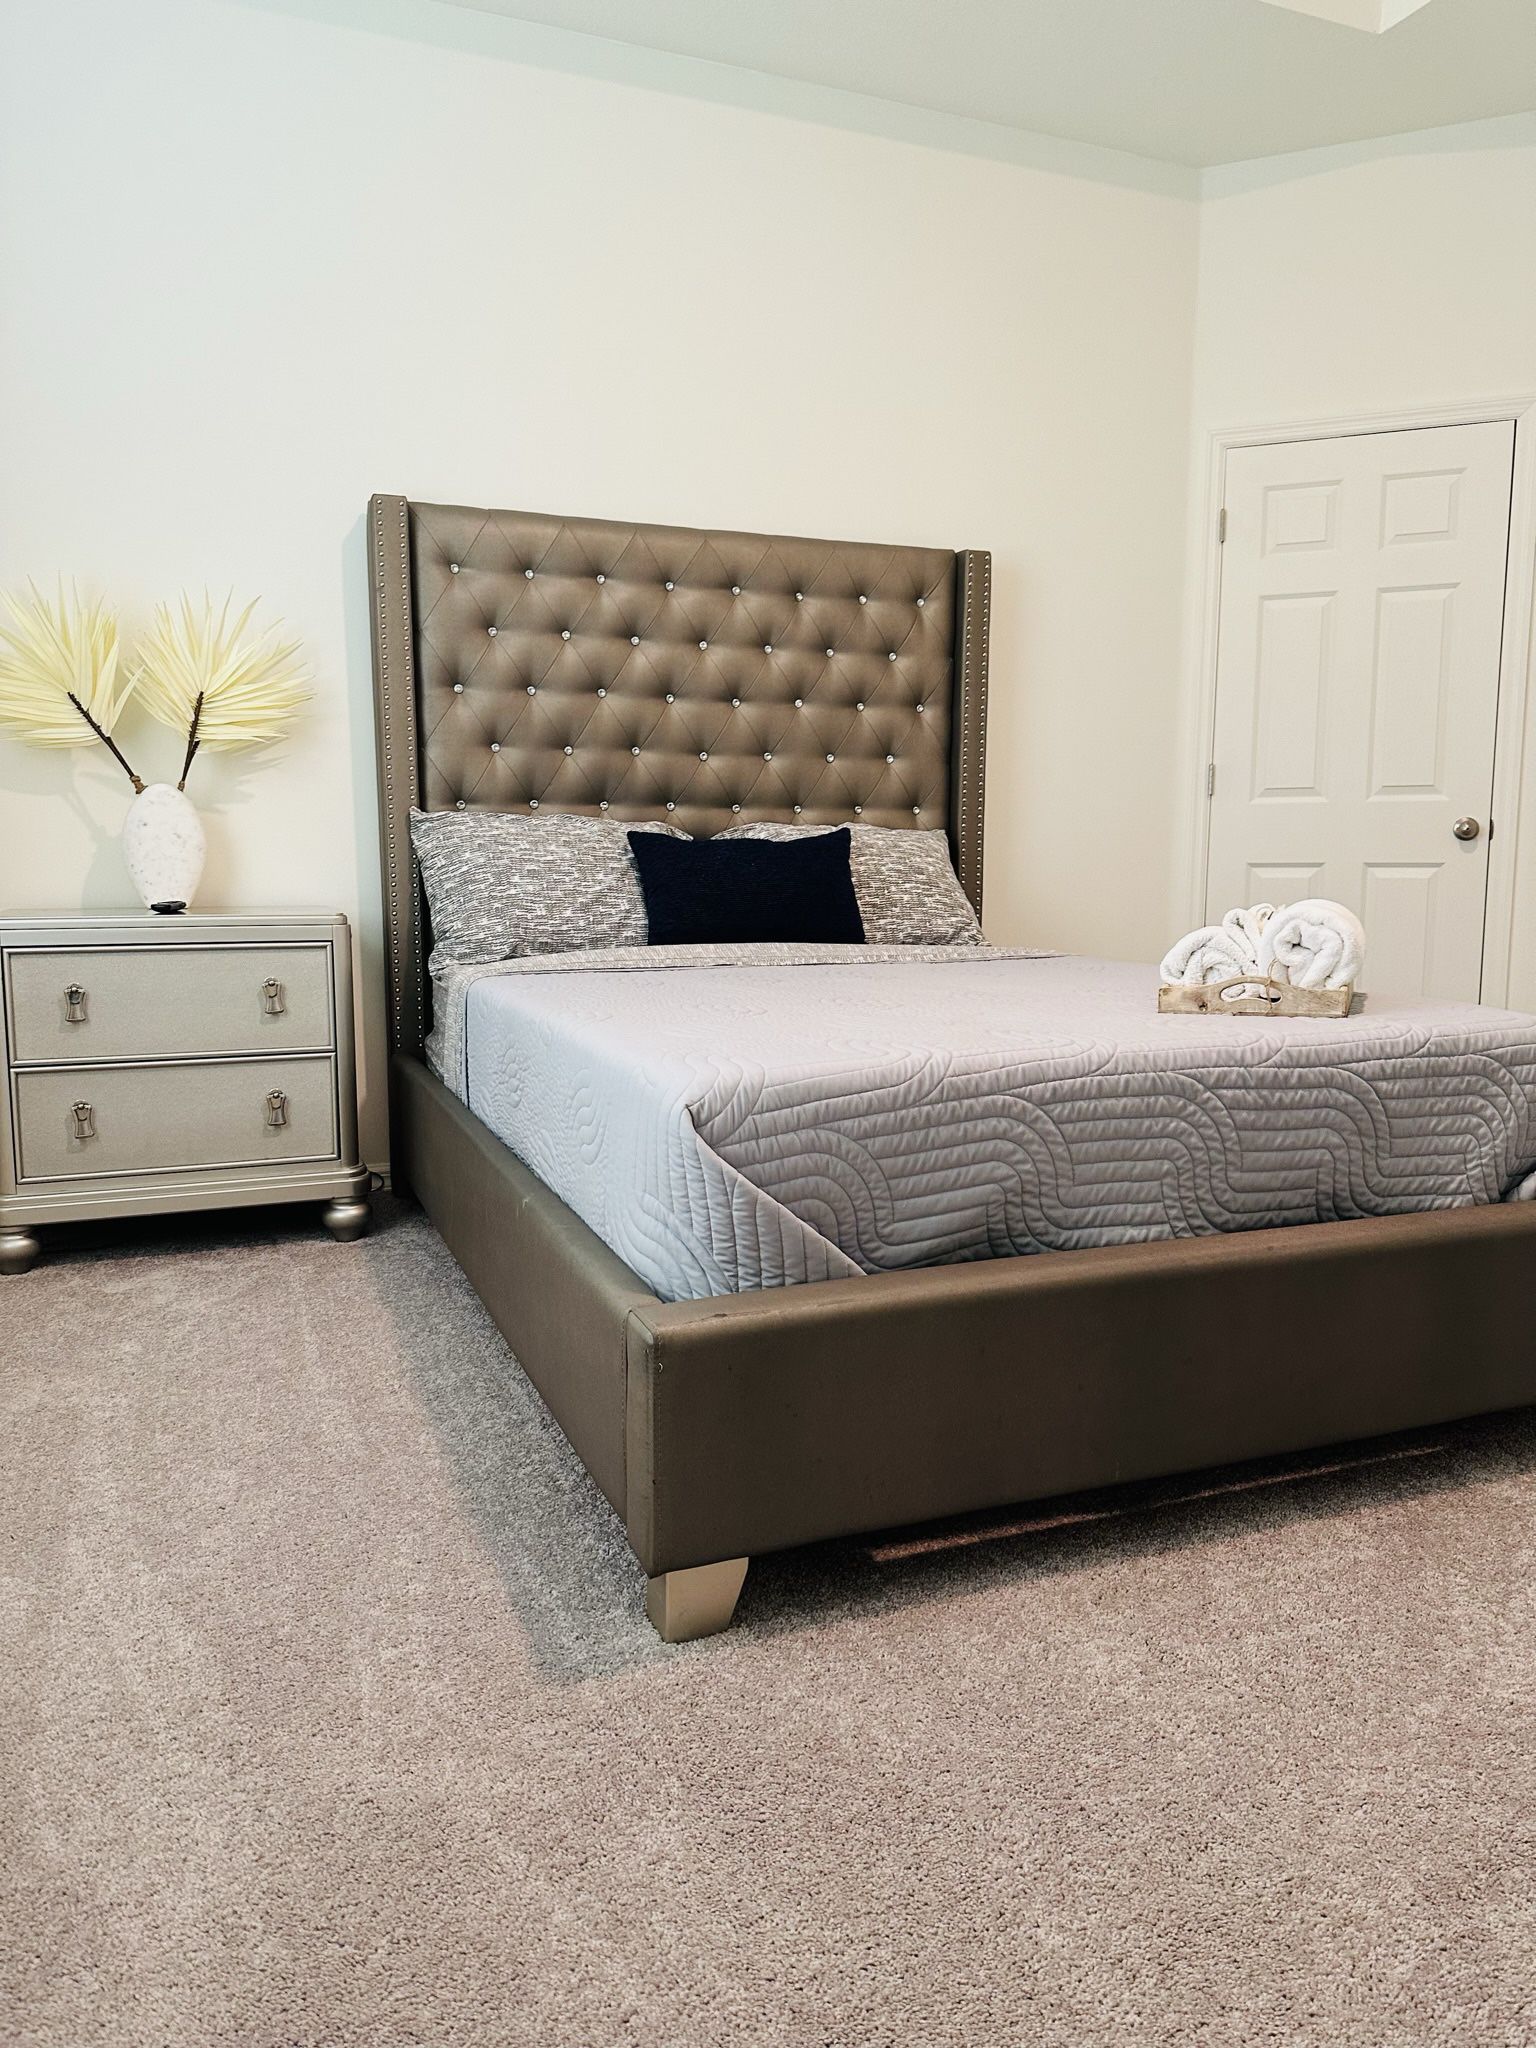 Queen Size Bedroom Set, Night Stand ,Mattress And Spring Box Included